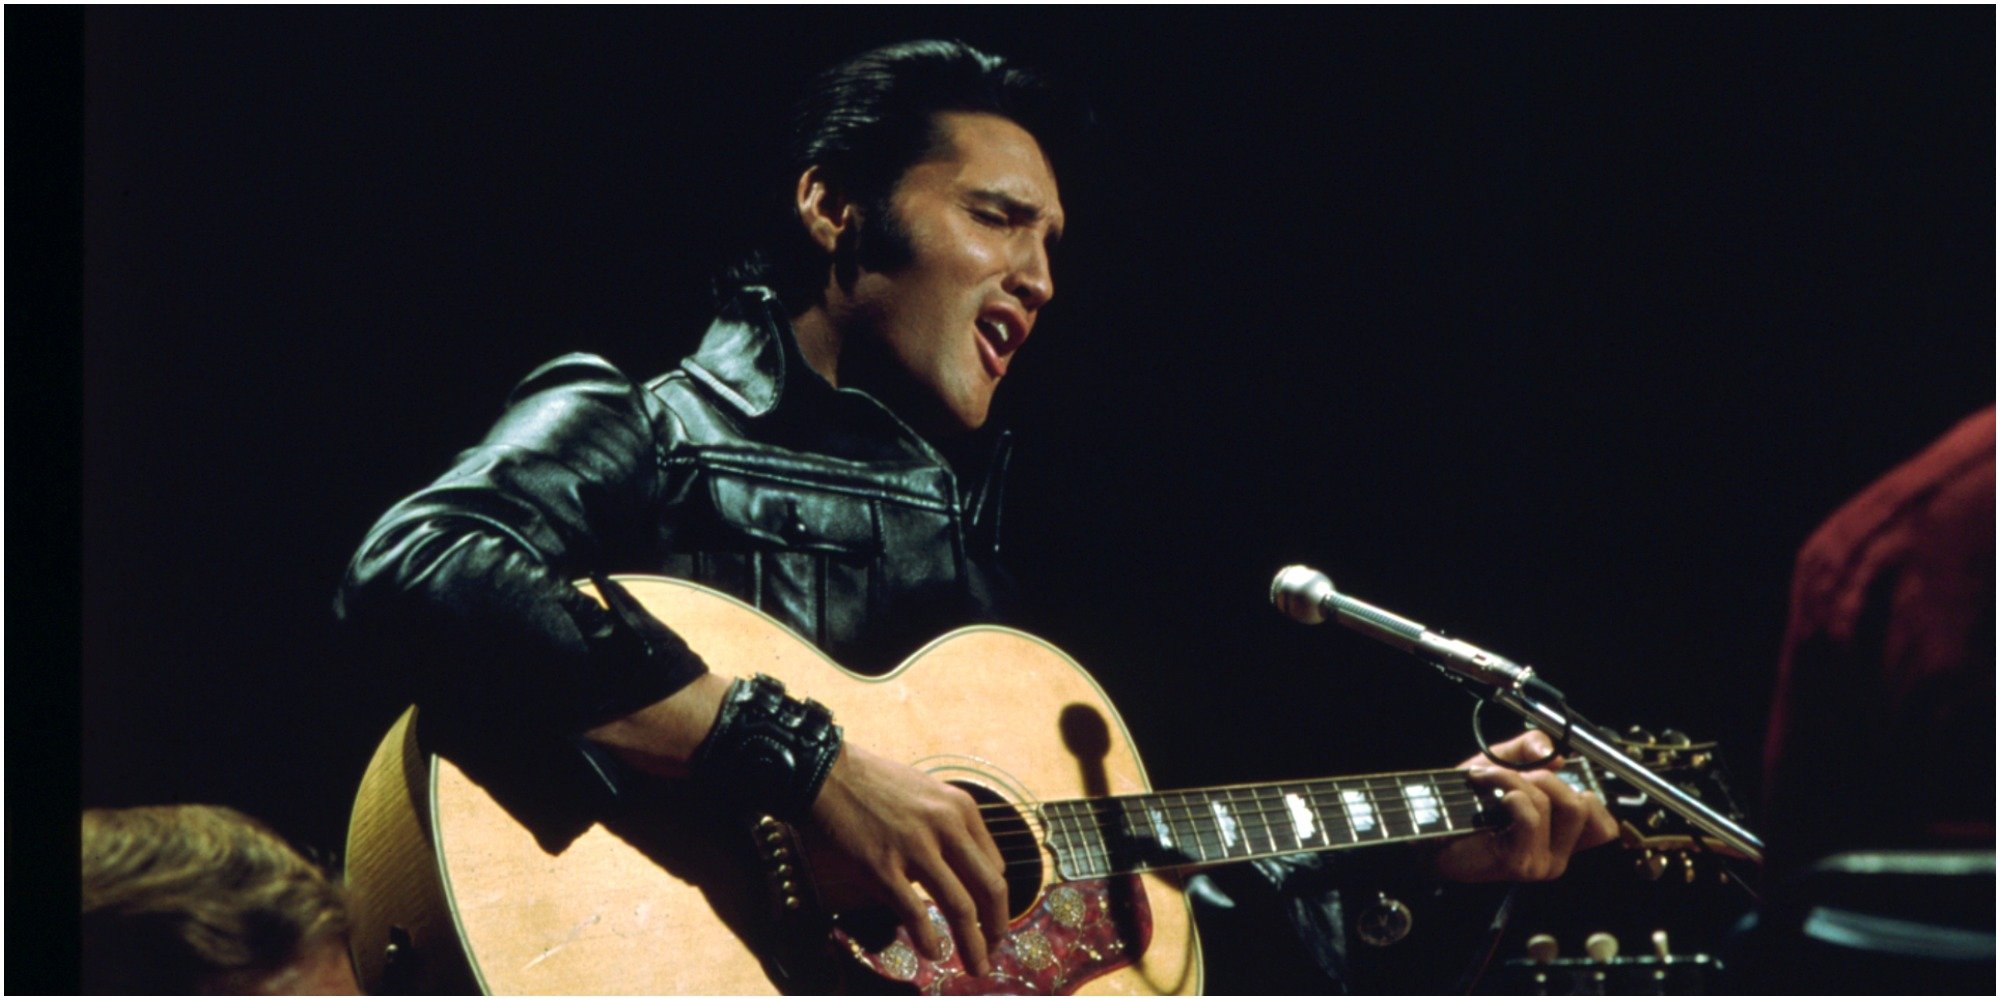 Elvis Presley photographed during the "68 Comeback Special" taping.